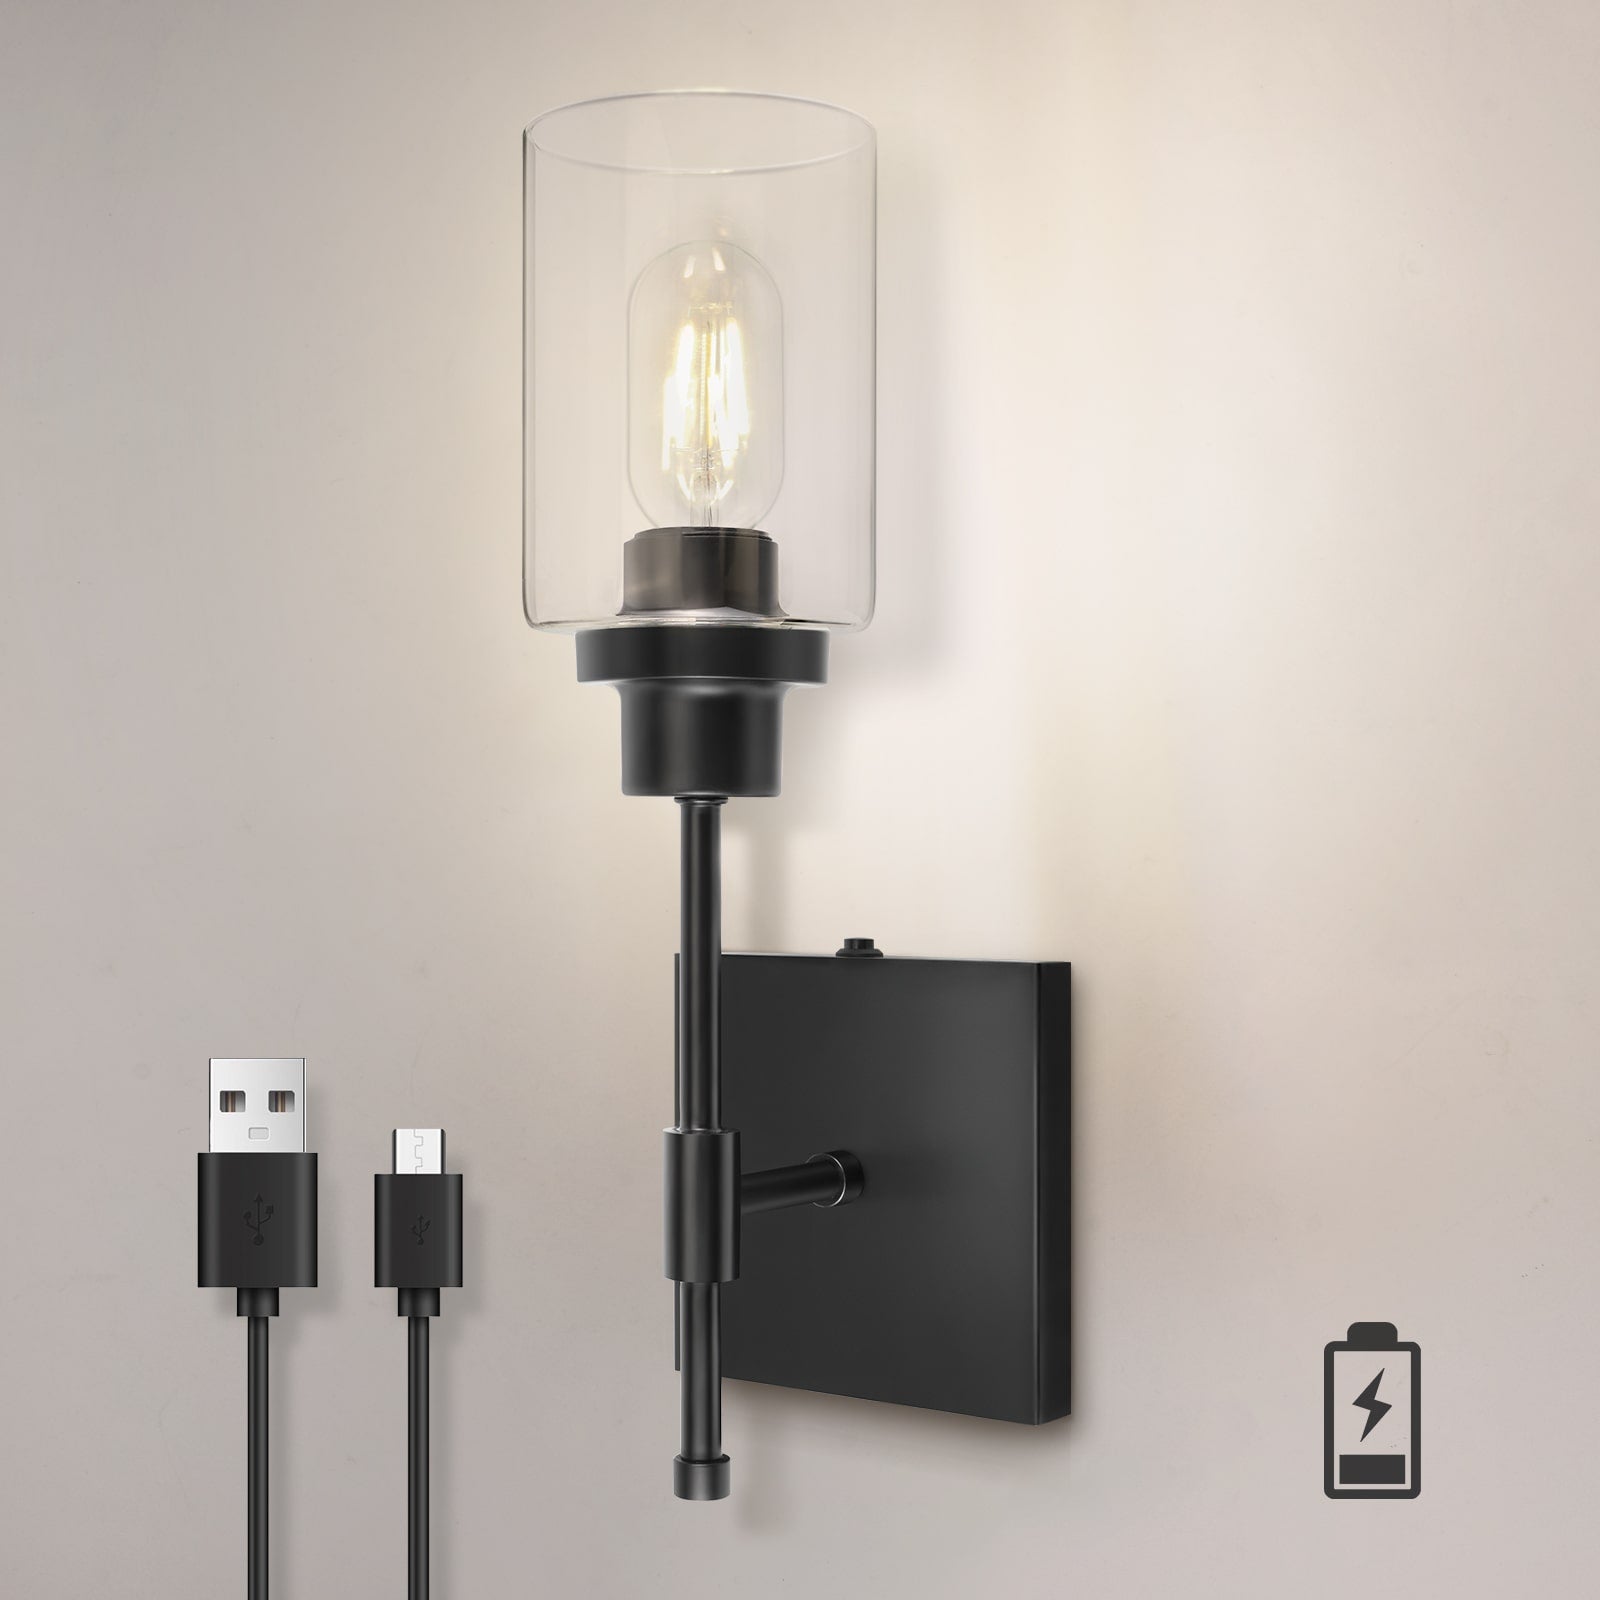 C01 Battery Operated Wall Sconce Modern Light Fixture for Hallway